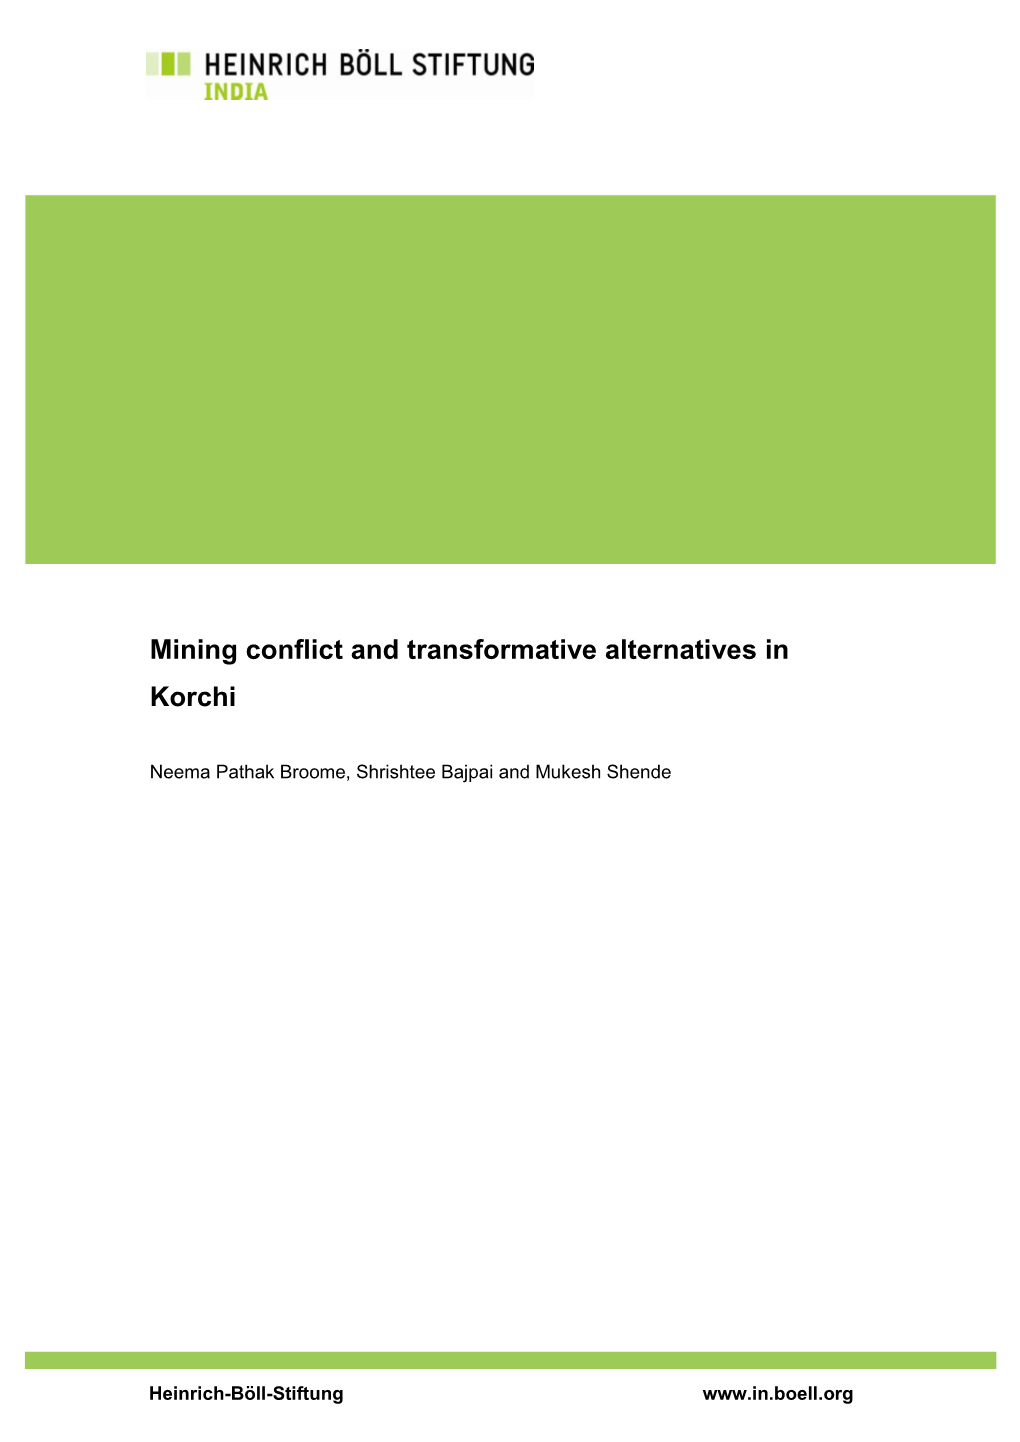 Mining Conflict and Transformative Alternatives in Korchi